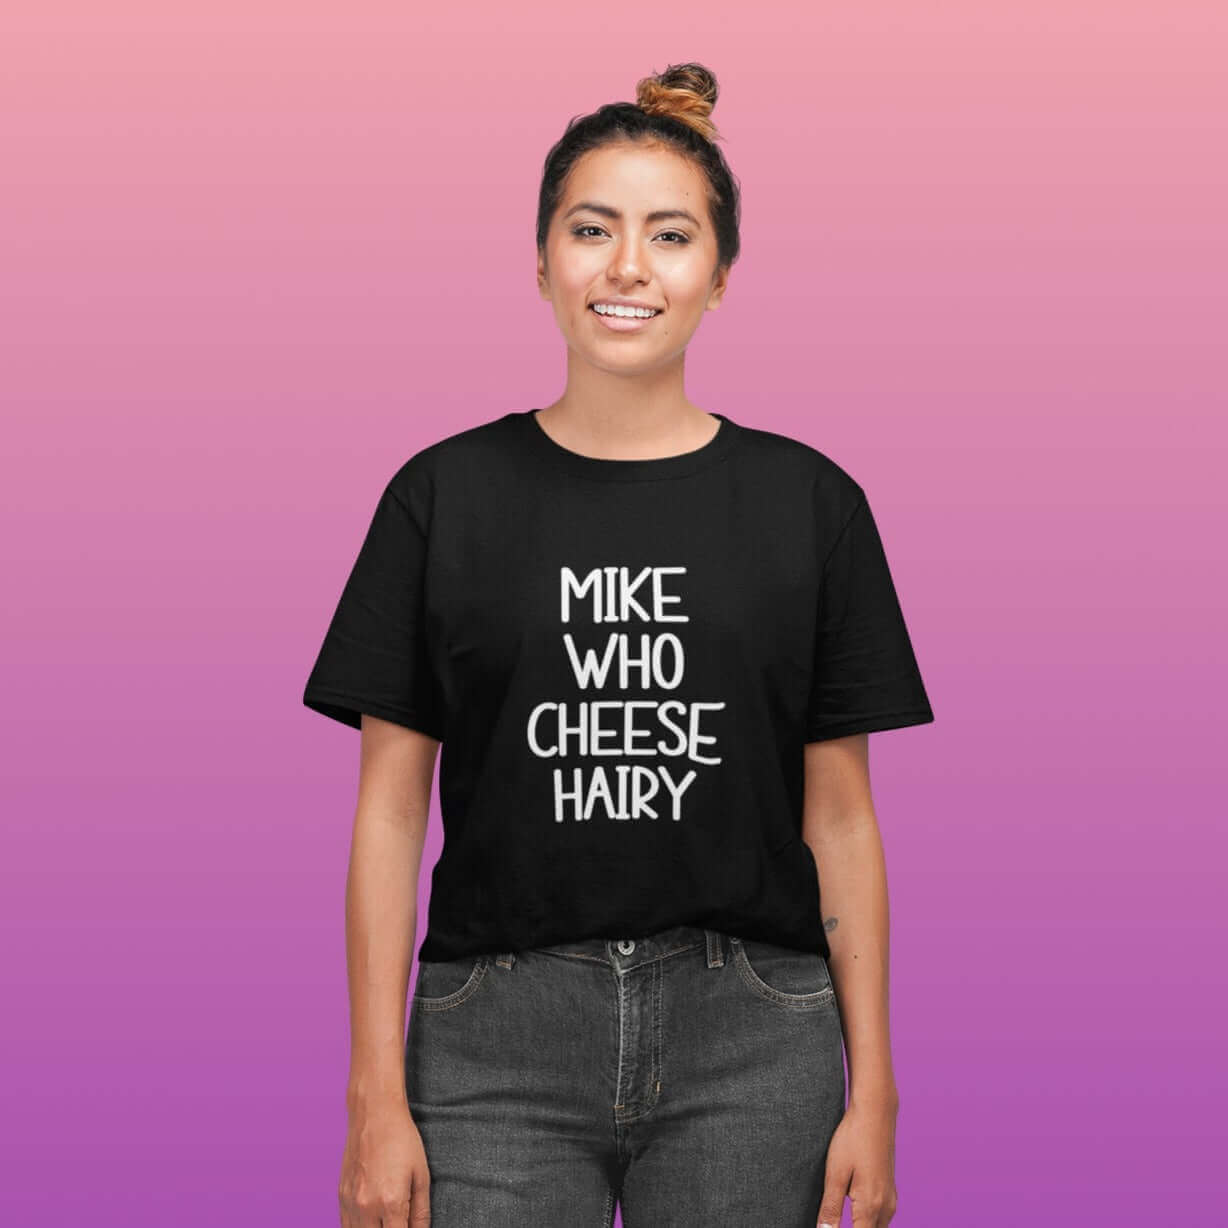 Smiling woman wearing black pun t-shirt with the words Mike who cheese hairy printed on the front.